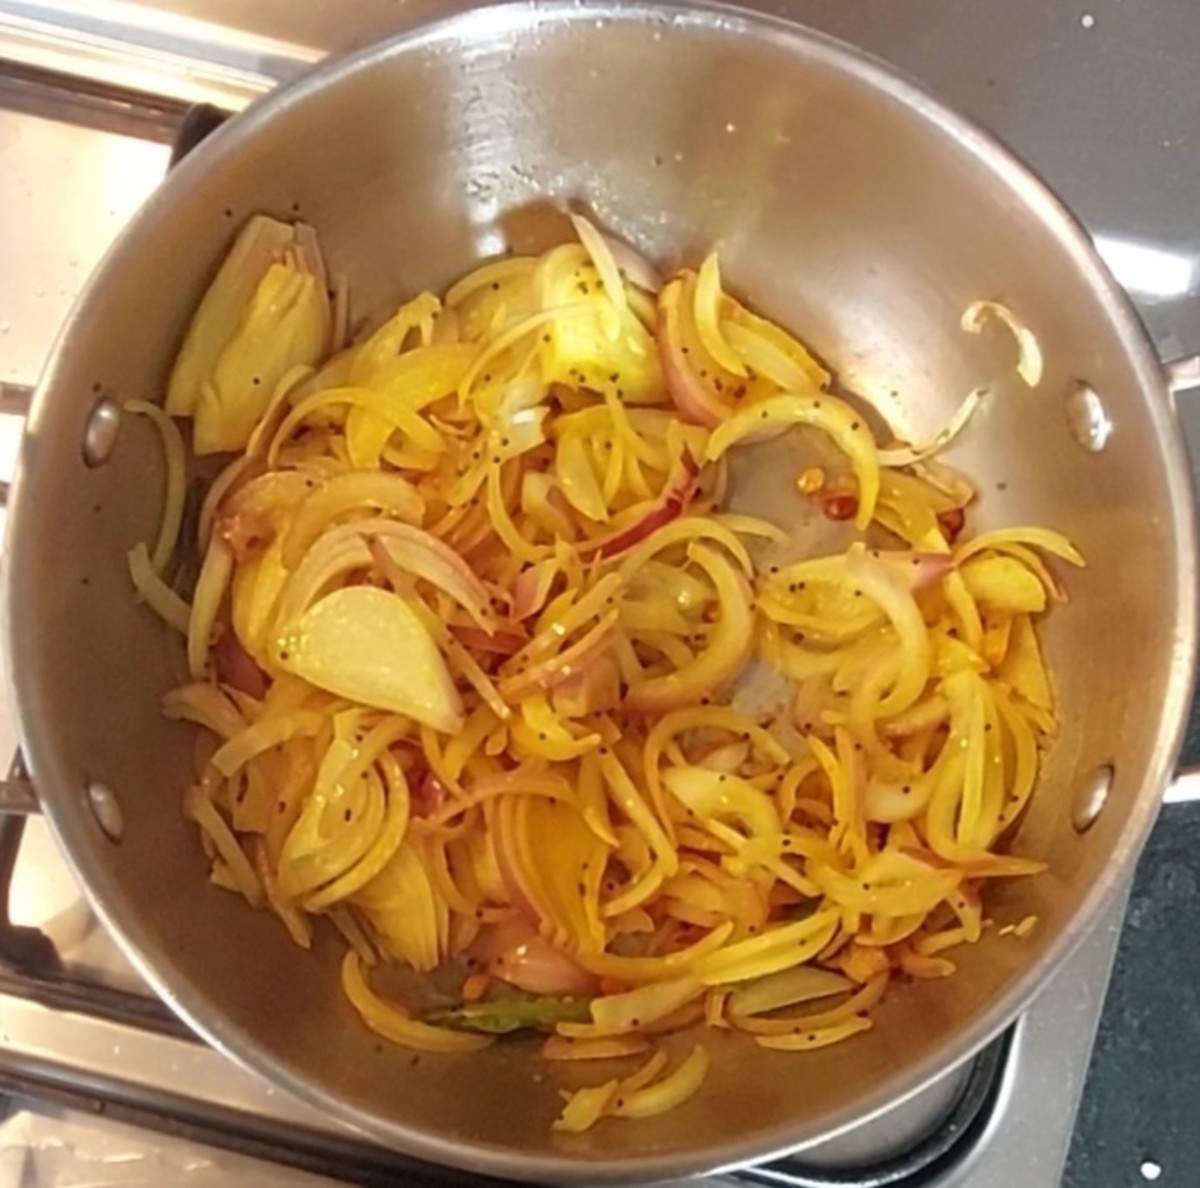 Saute well till onion turns translucent or aromatic.